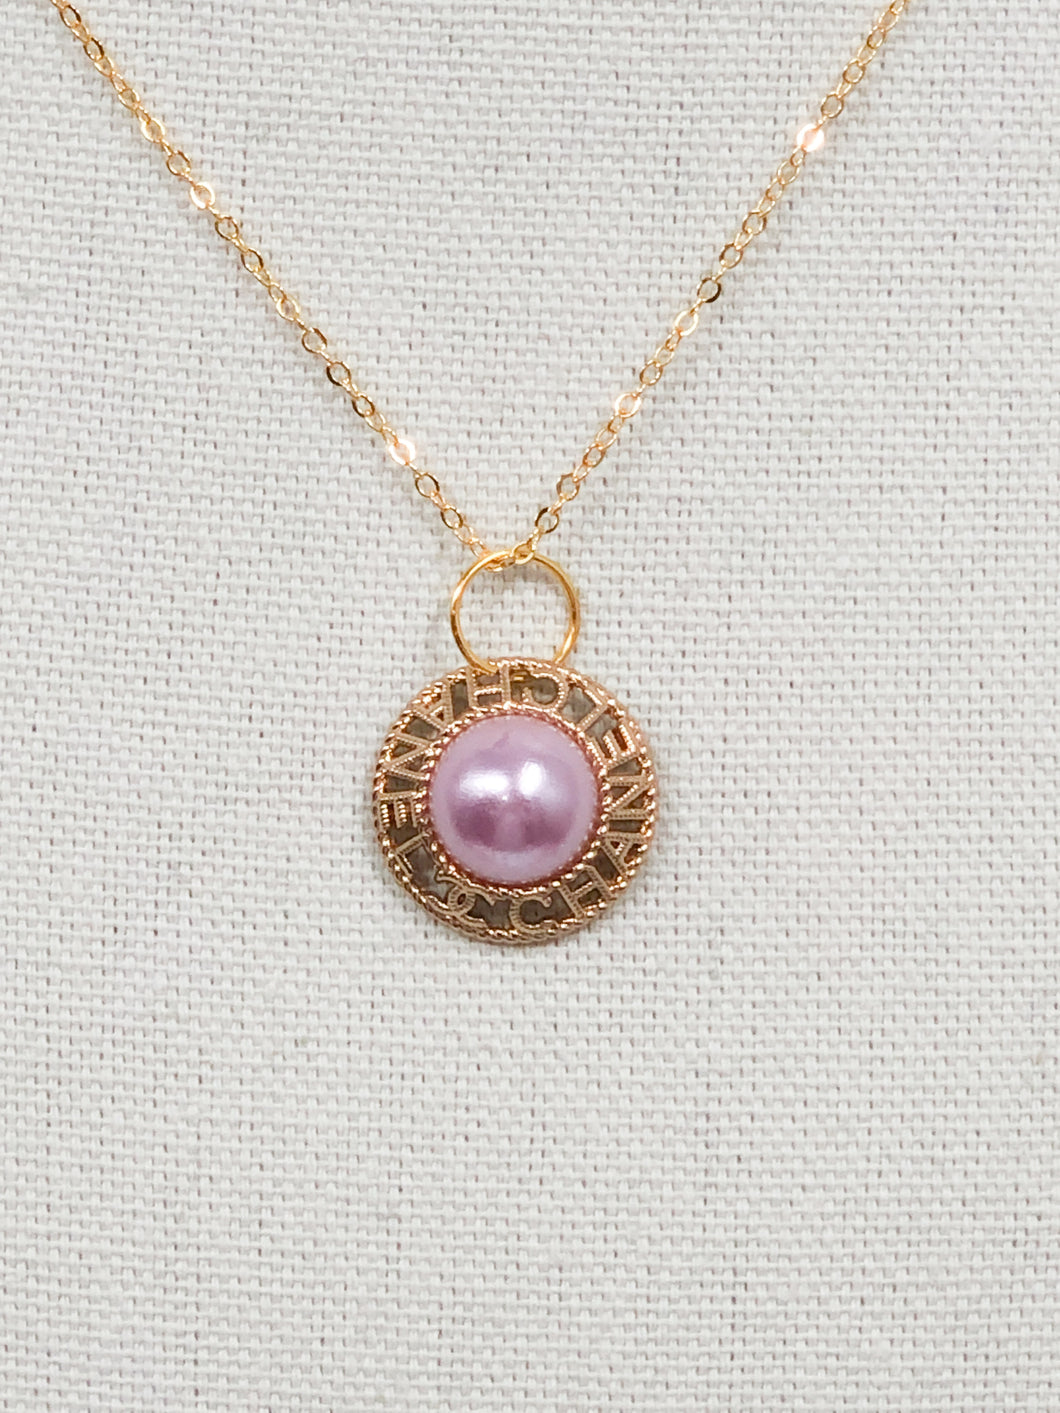 A stunning pink pearl glistens in a gold setting with the words CHANEL and the CC logo surrounding the pearl in a circle.  A sweet addition to your jewelry collection, this gorgeous piece is rare and unique. This necklace is an attention grabber!  Color- Pink and gold. Vintage Coco Chanel button. Pendant length with bale- 1 inch. 18-inch diamond cut flat gold chain. Lobster clasp. Composition- 16k gold plating over brass. Handmade re-purposed jewelry.